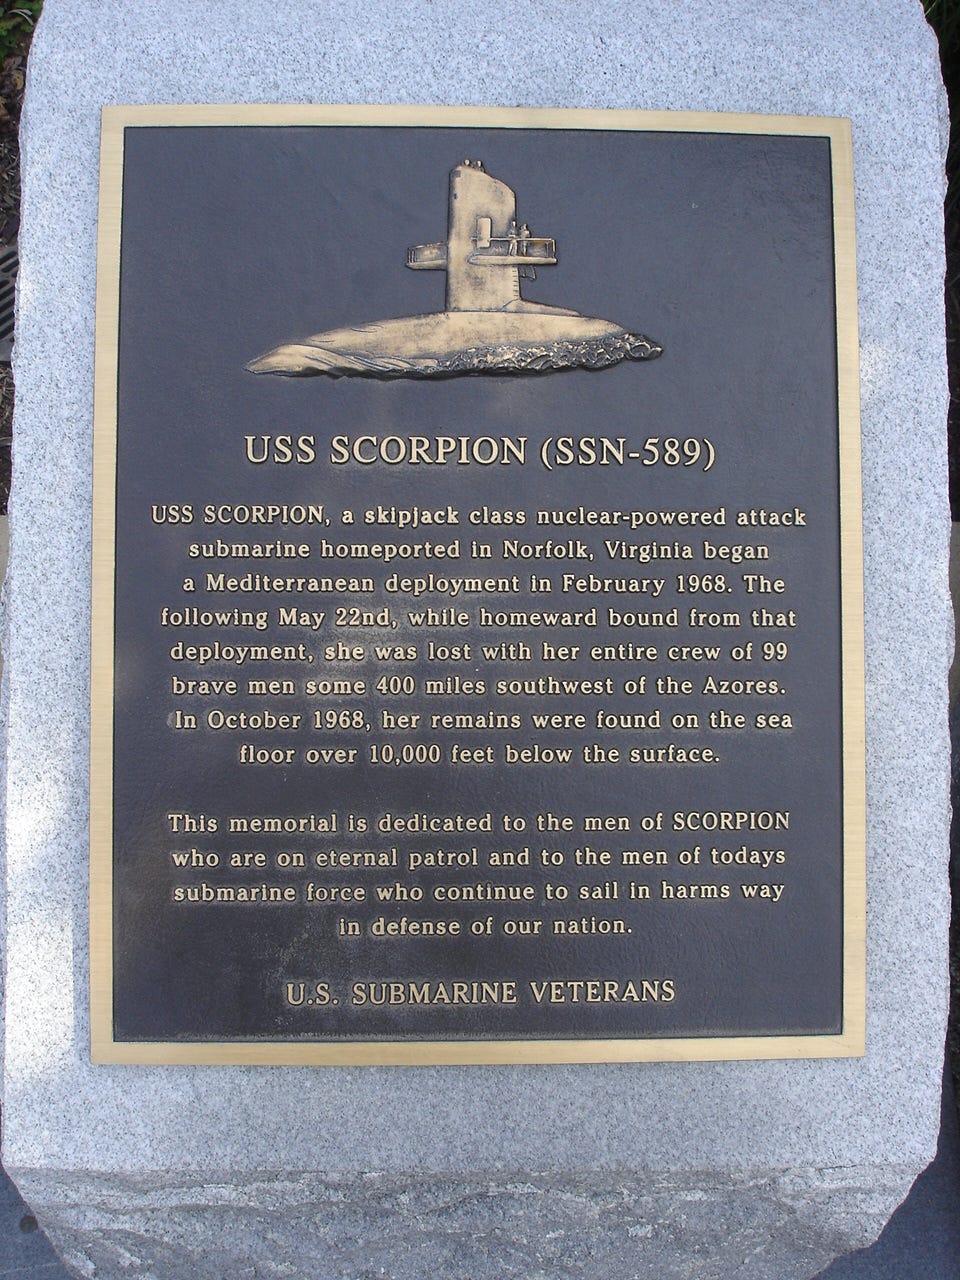 Mysteries of the Sea: What Sank the USS Scorpion? | by Michael East | The Mystery Box | Medium